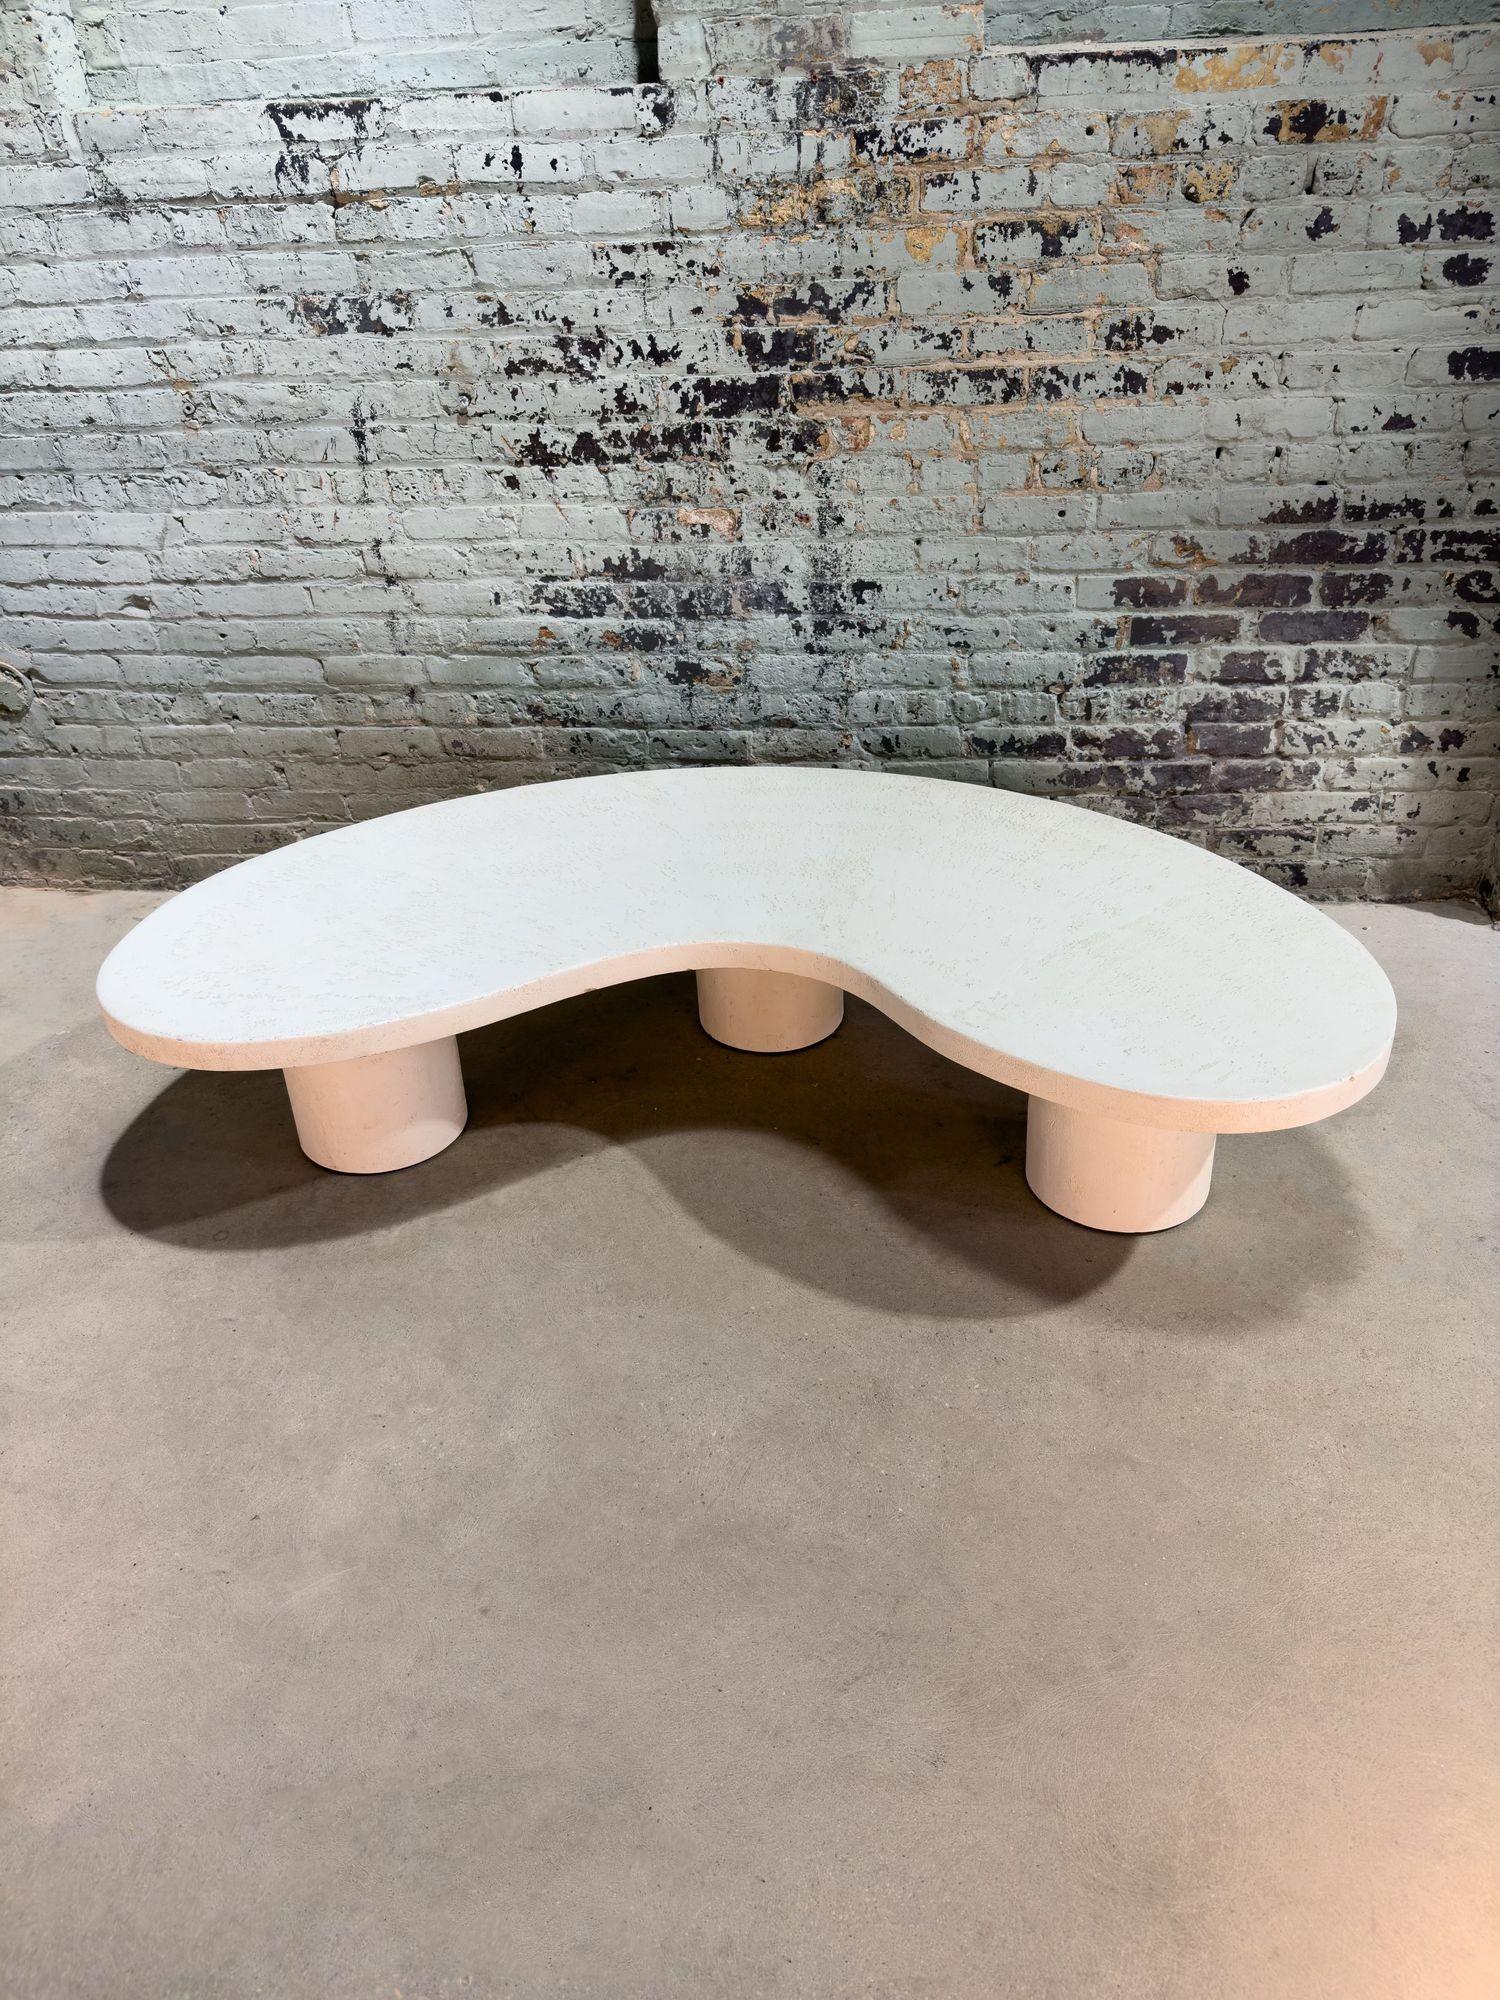 Post Modern Biomorphic Parra Plaster Molded Concrete Coffee Table, 1980 In Good Condition For Sale In Chicago, IL